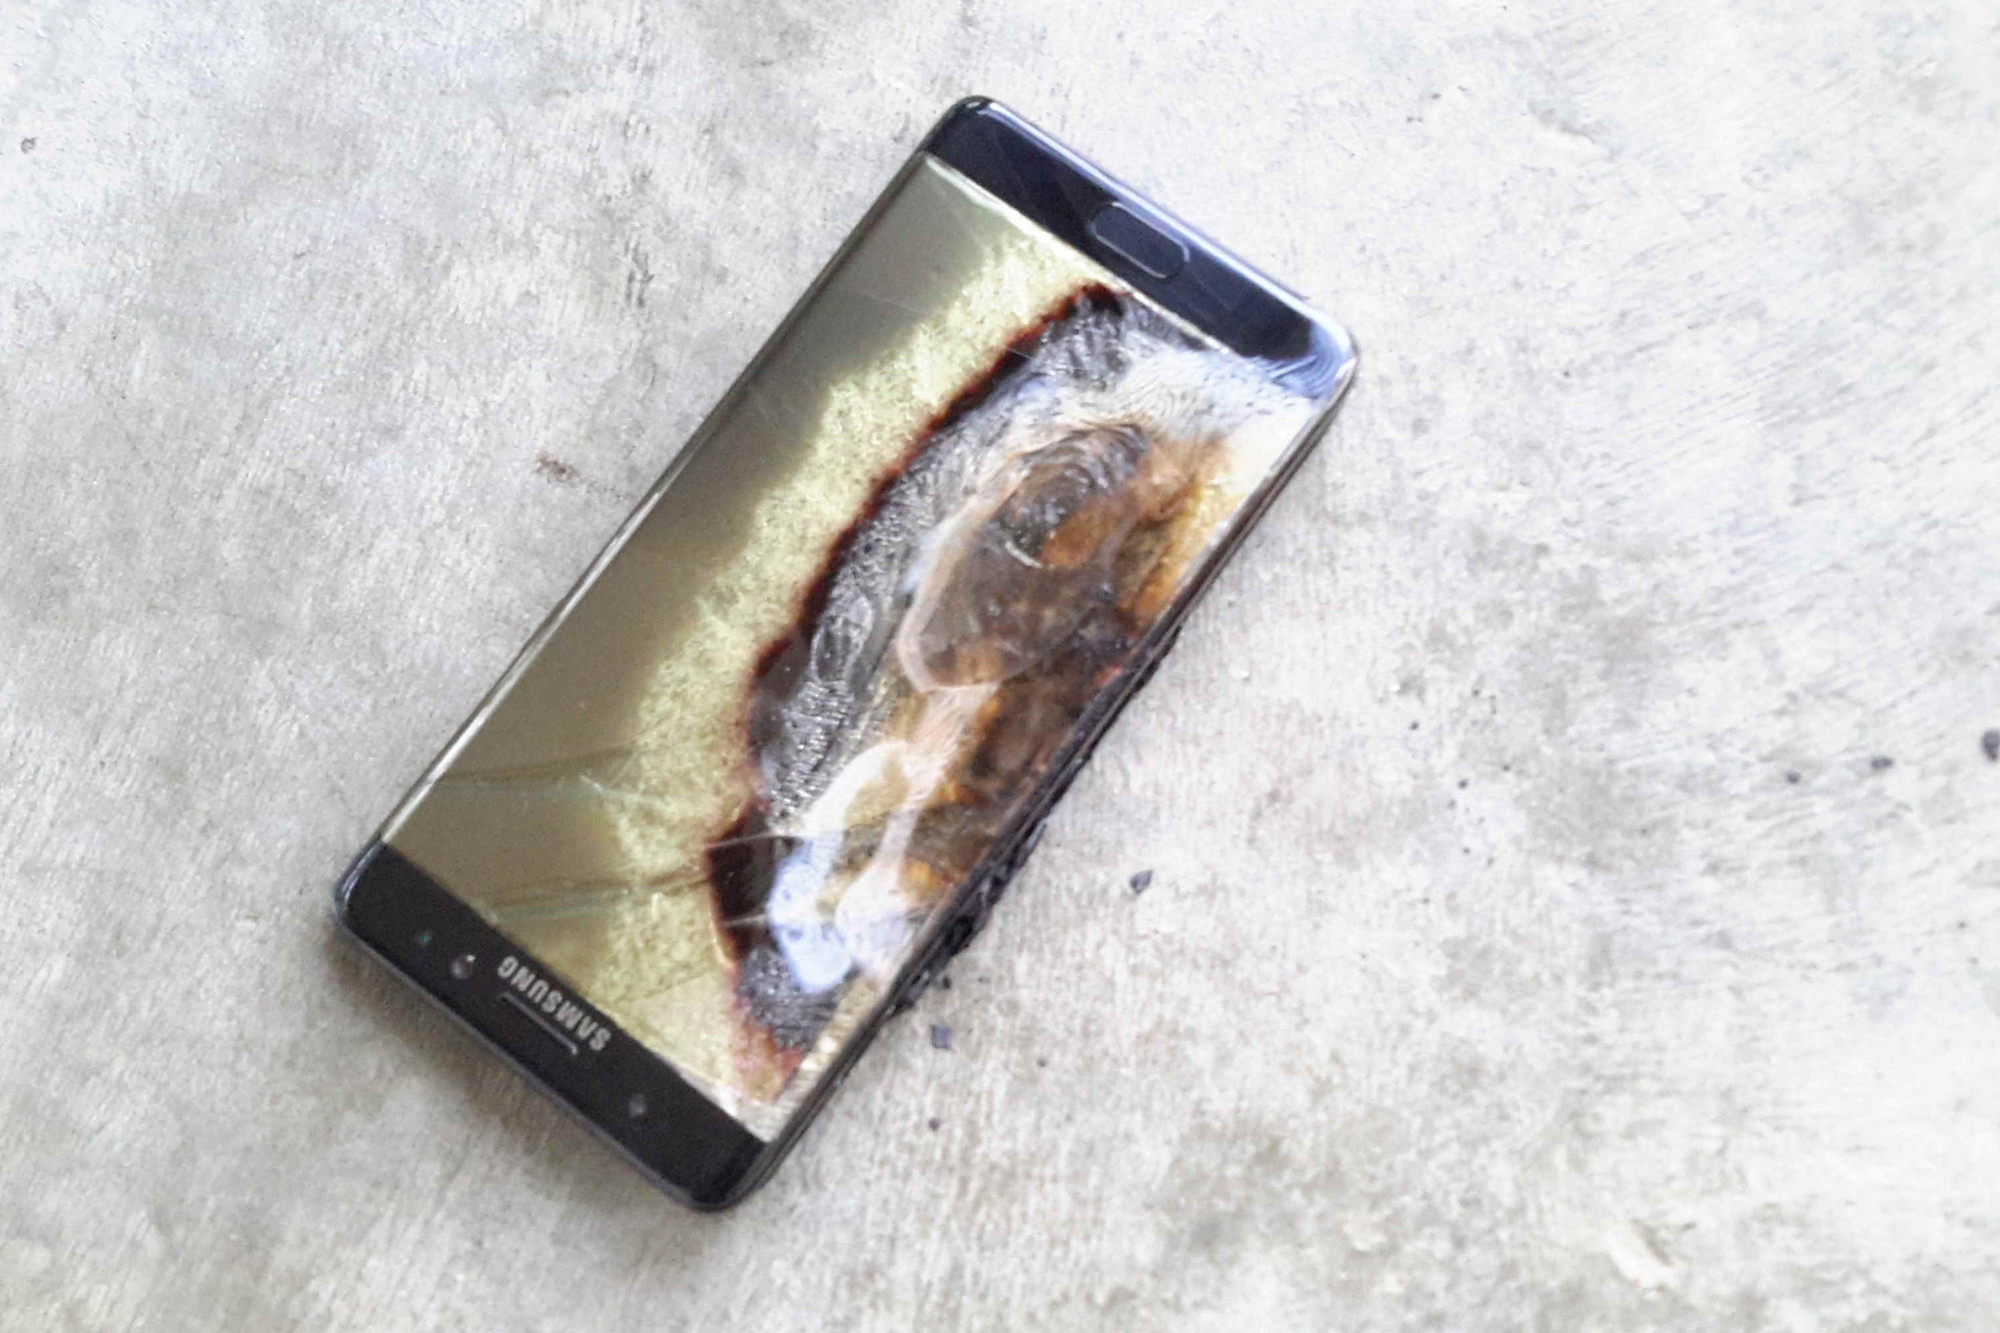 samsung galaxy note 7 recall fire explosion (3)